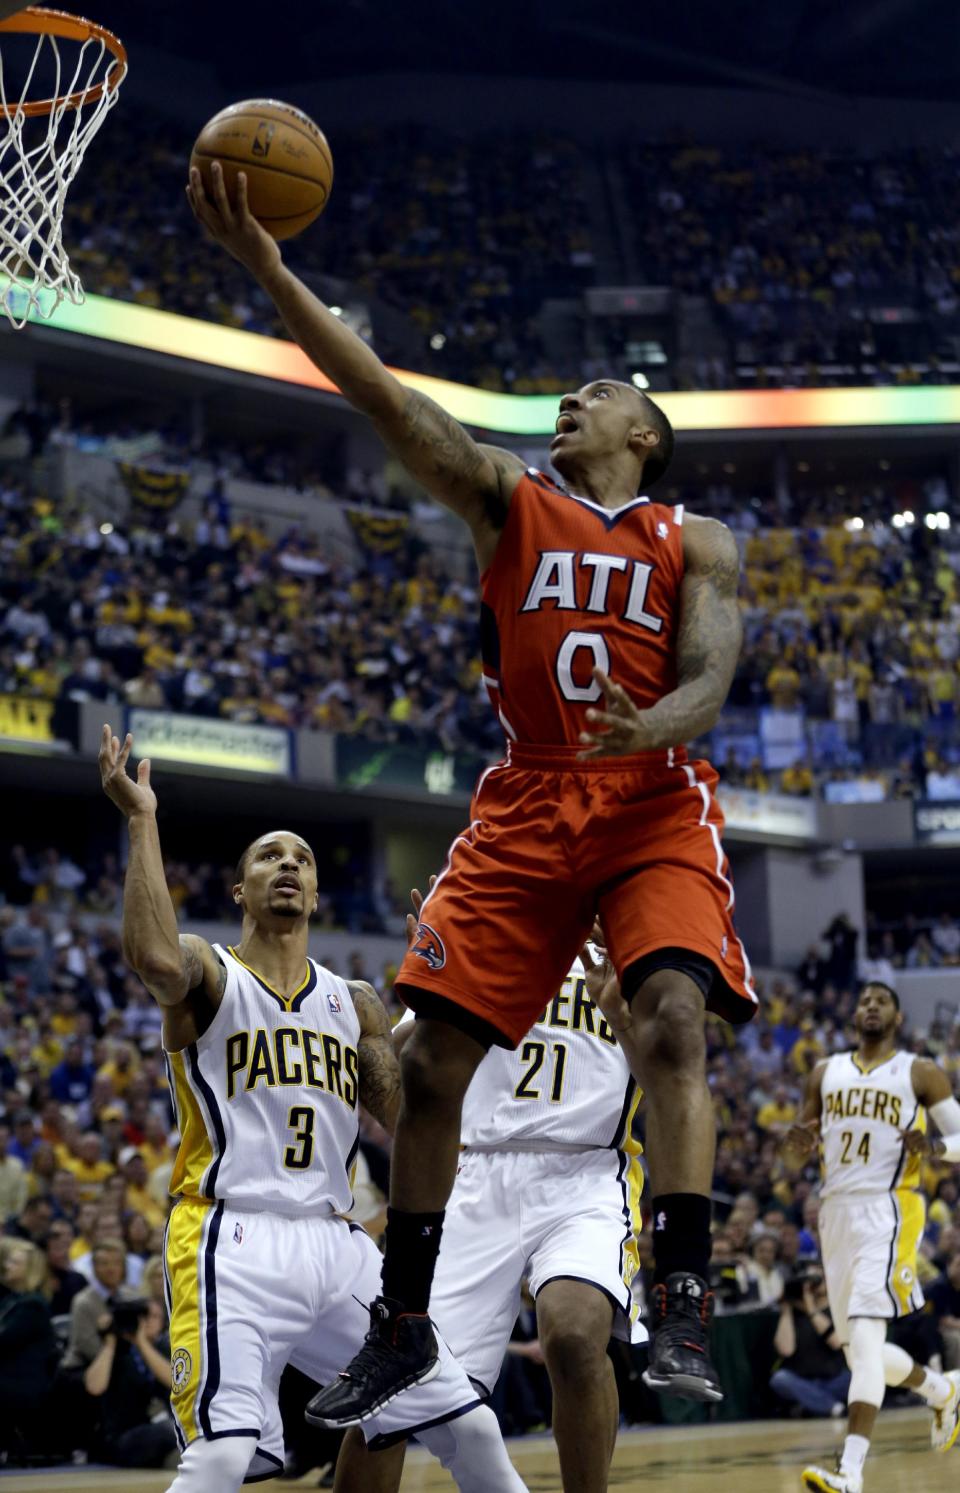 Atlanta Hawks' Jeff Teague (0) goes up for a shot as Indiana Pacers' George Hill (3) defends during the first half in Game 5 of an opening-round NBA basketball playoff series Monday, April 28, 2014, in Indianapolis. (AP Photo/Darron Cummings)